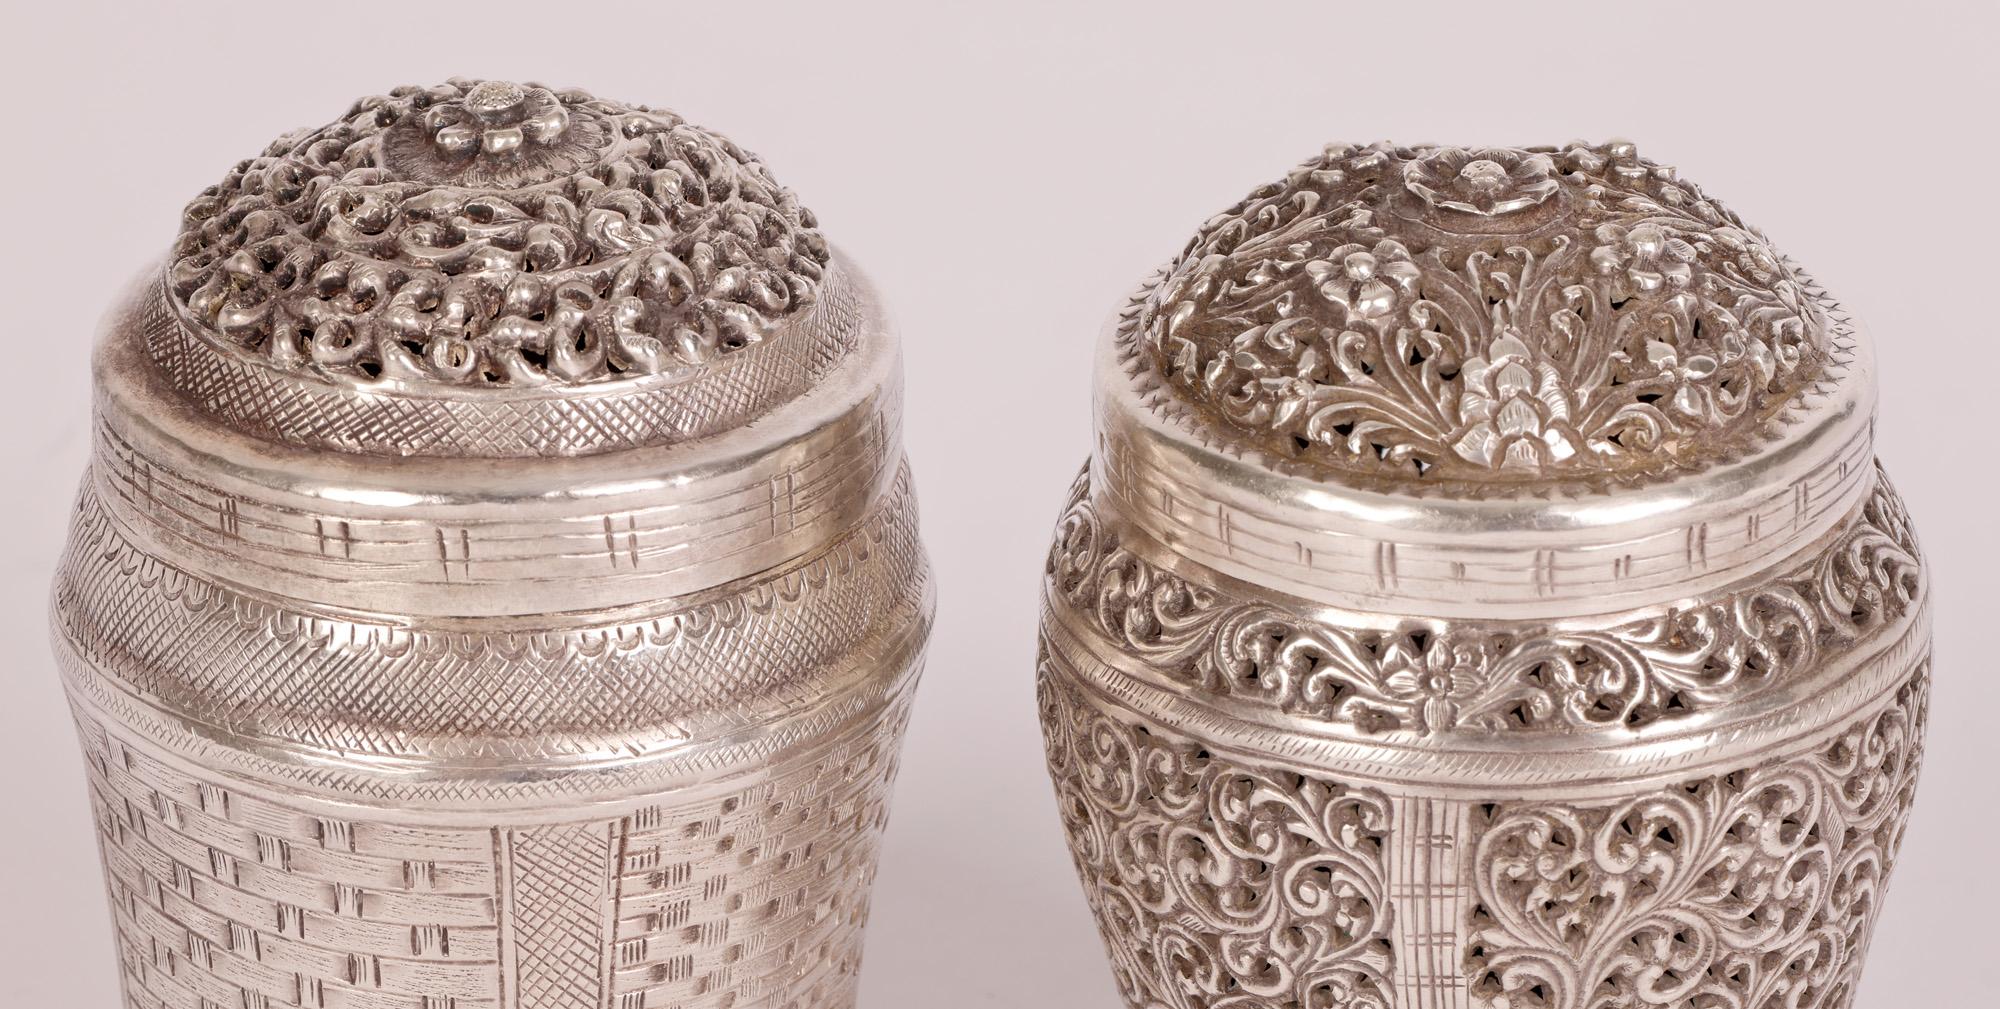 Two antique Burmese silver basket shaped boxes, possibly Betel containers, one with a pierced scroll leaf design and the other with a molded basket weave design dating from the 19th or early 20th Century.

Betel boxes were used to hold and carry